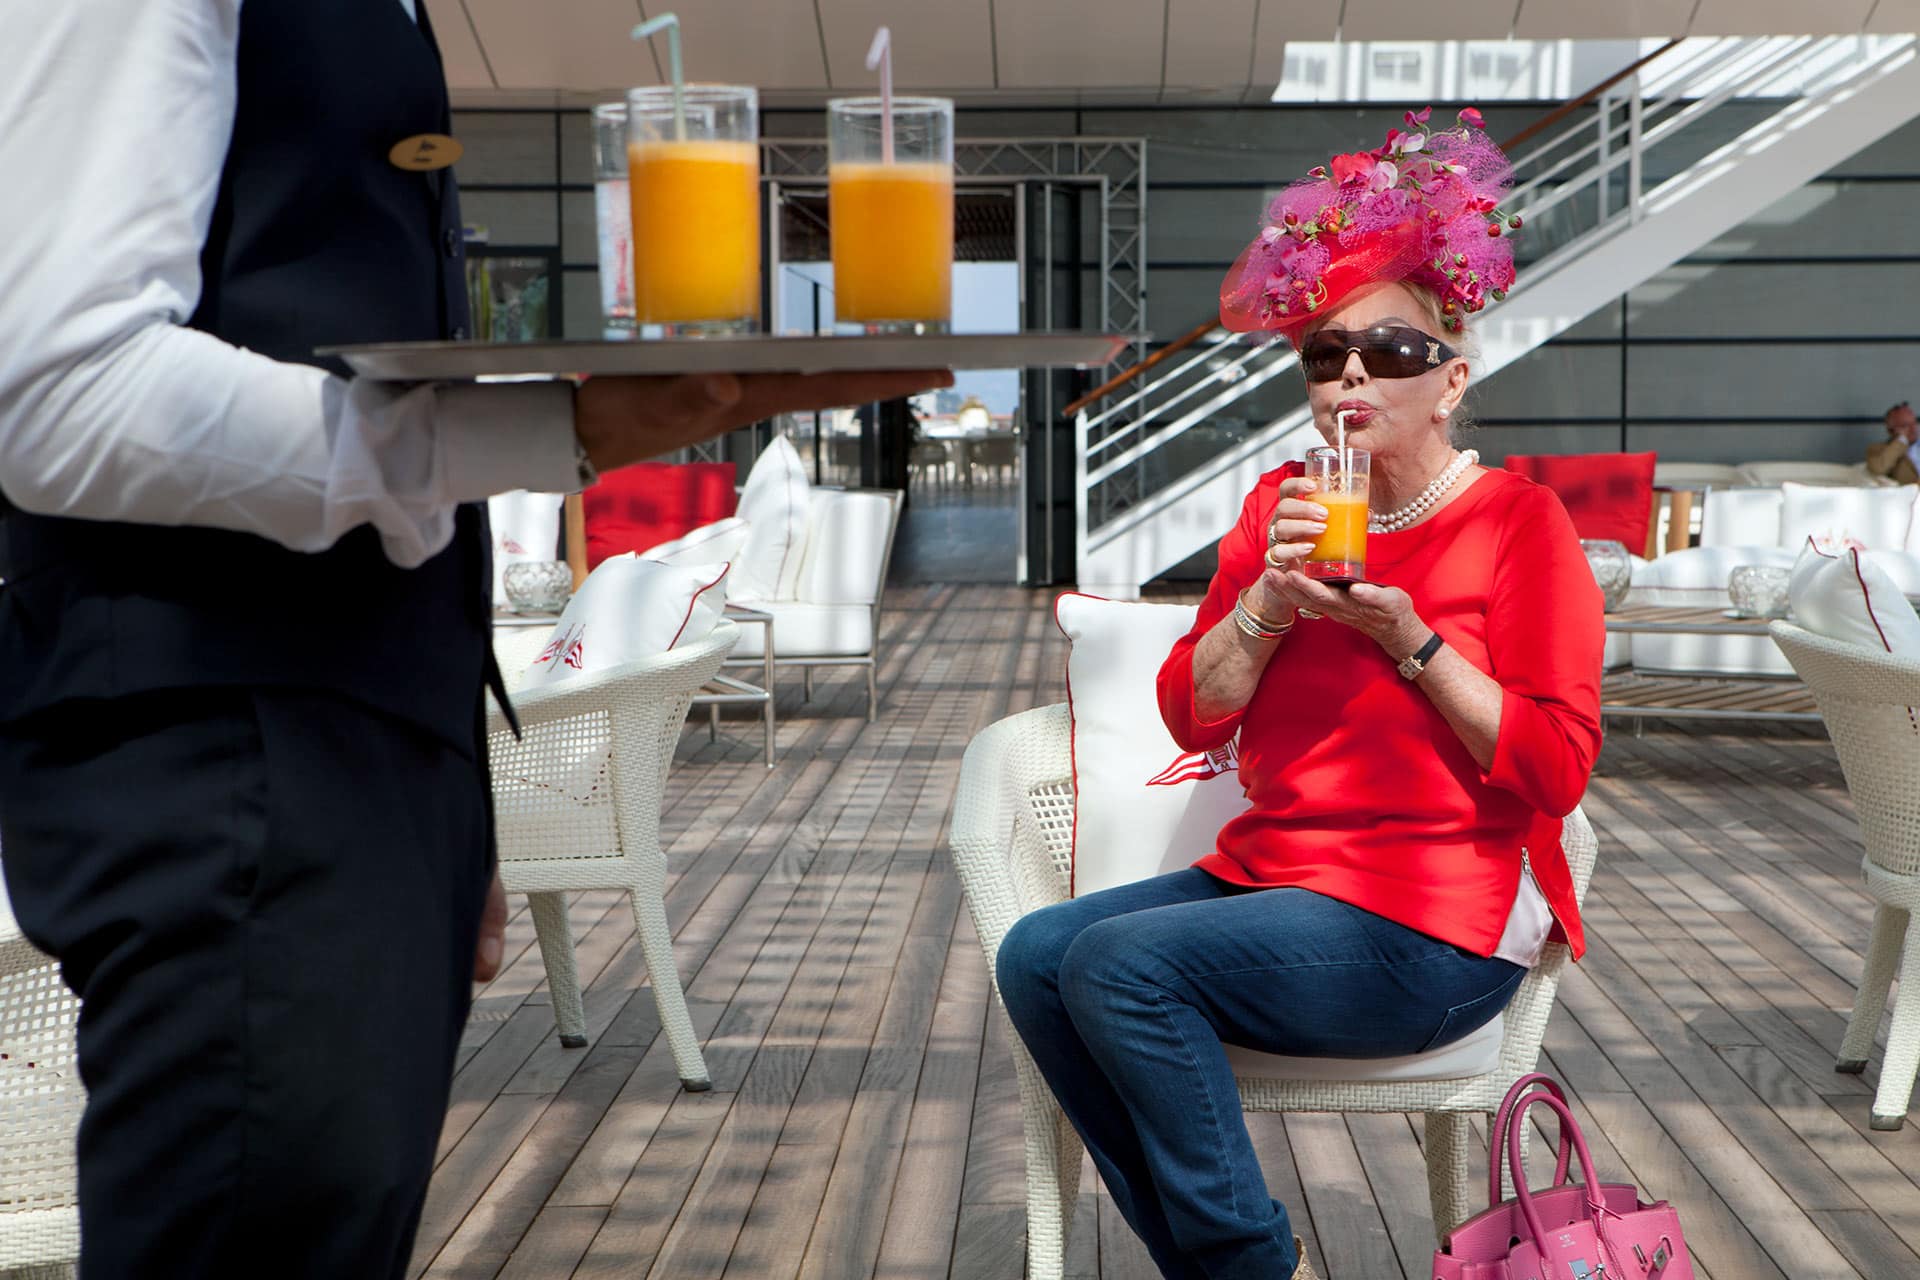 Woman wearing sunglasses, a red top and elaborate hat sips orange juice as a waiter stands in the foreground holding a tray